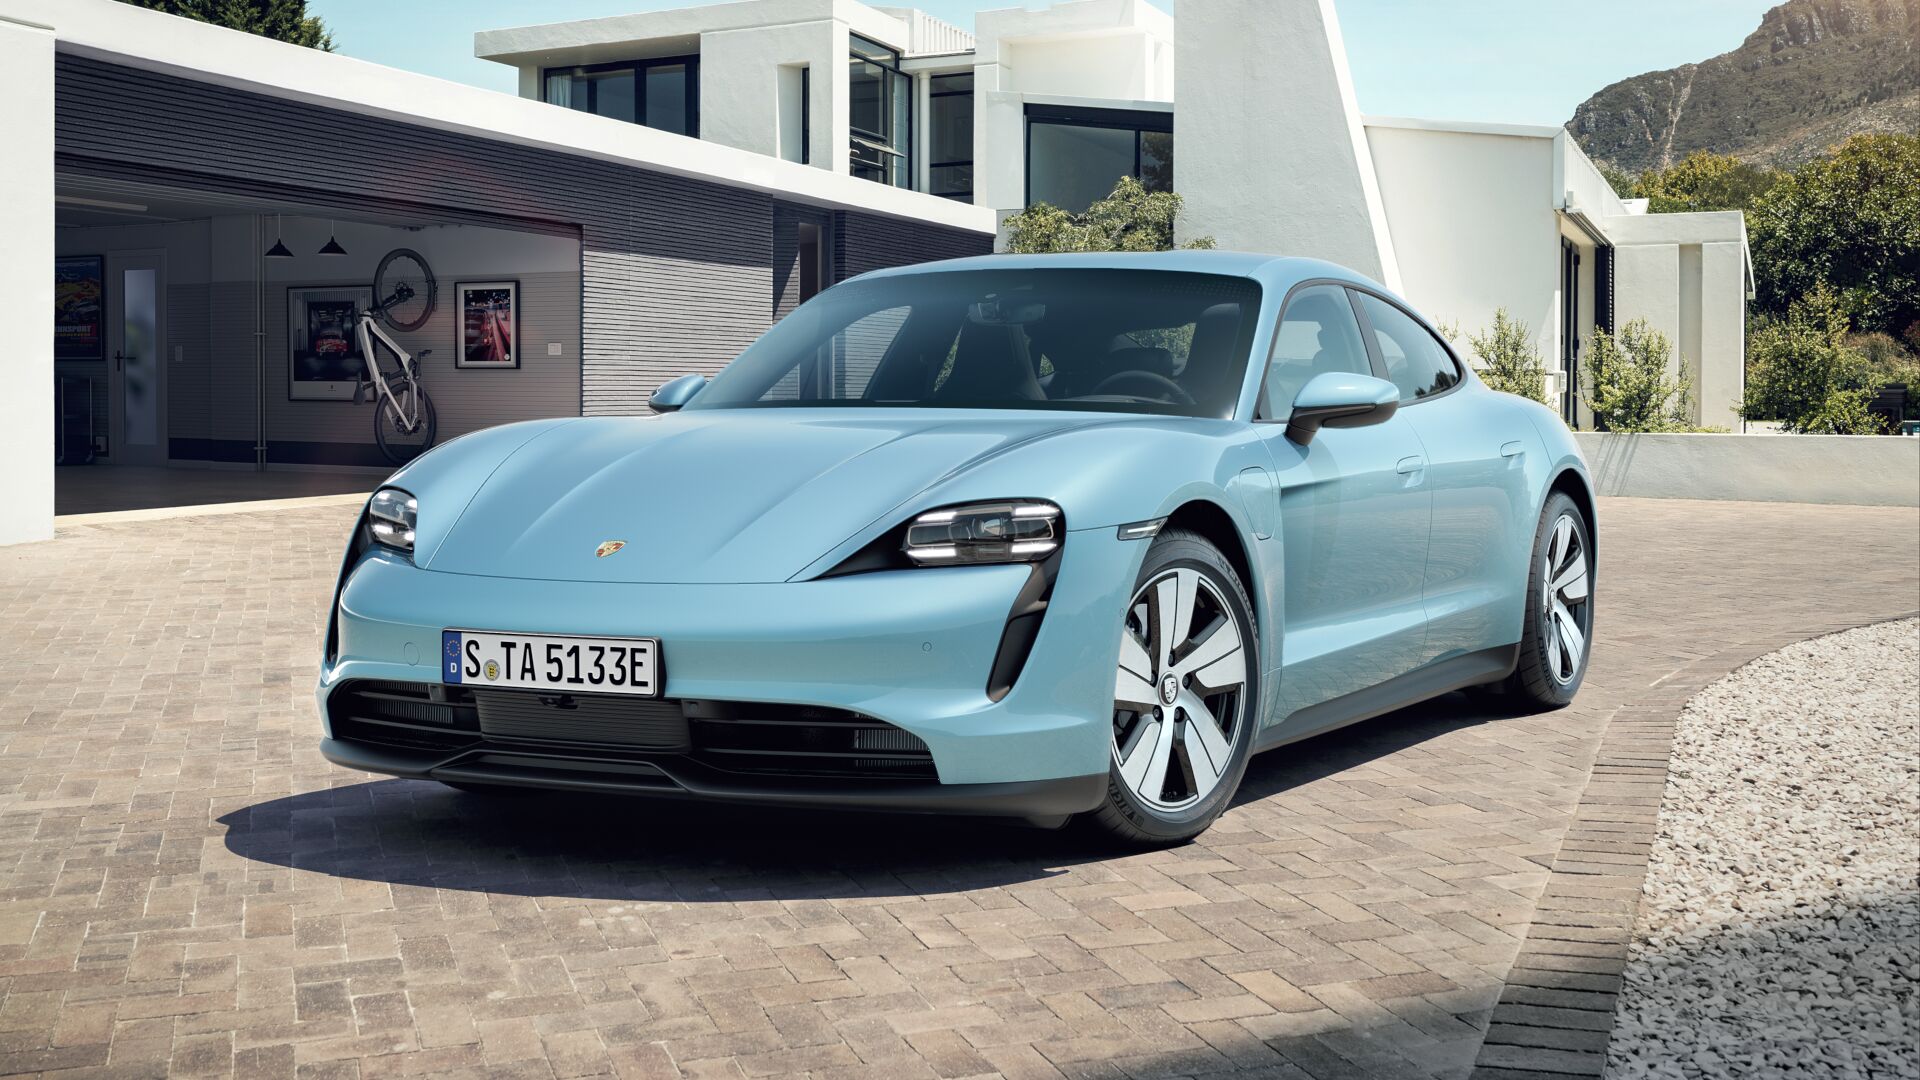 You can now buy or lease the latest Porsche Taycan electric and find out the best options available at your local Porsche Center near Naples, Florida.